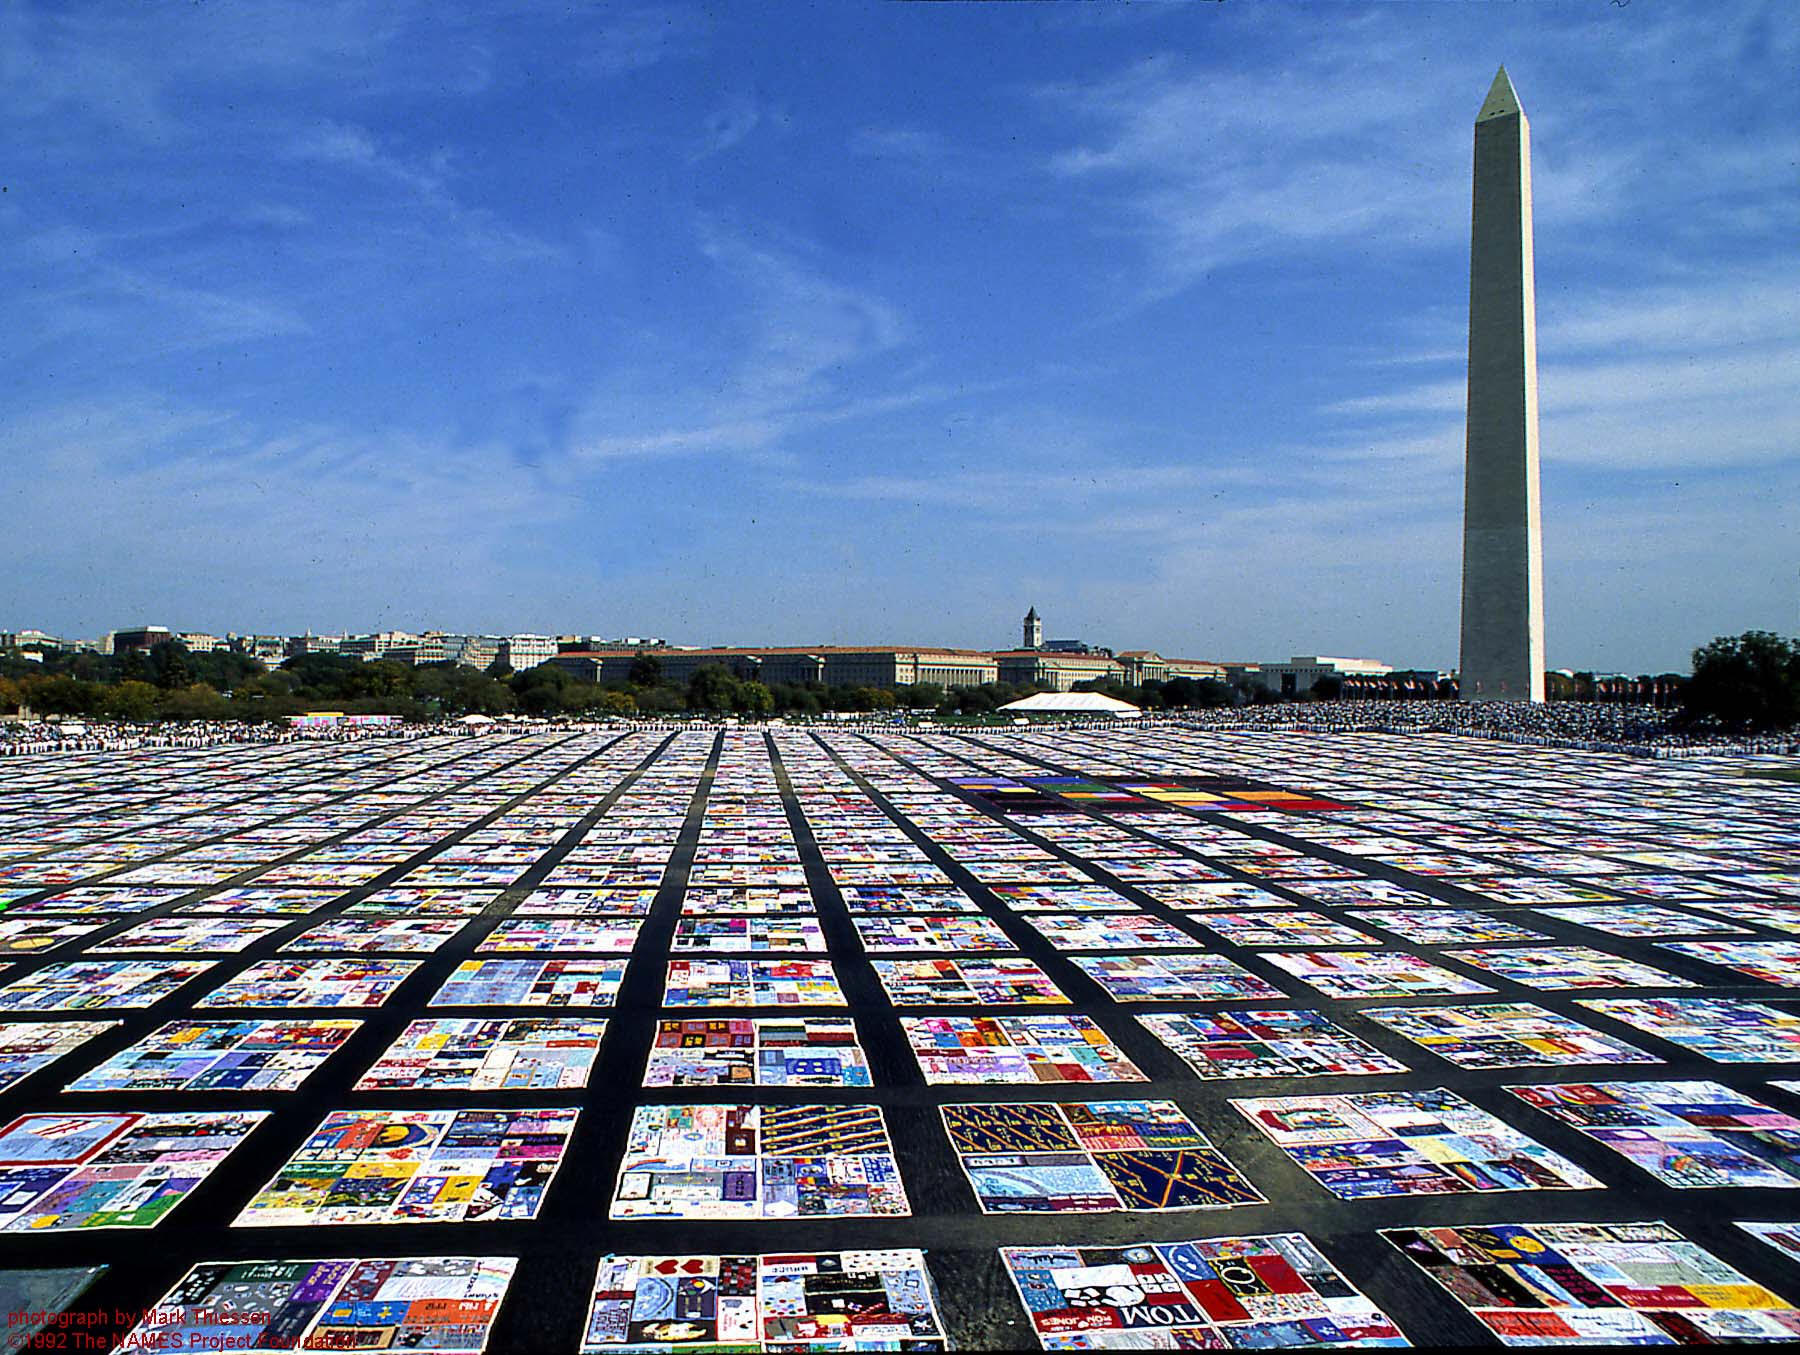 A photo of a large quilt by the Washington Monument.